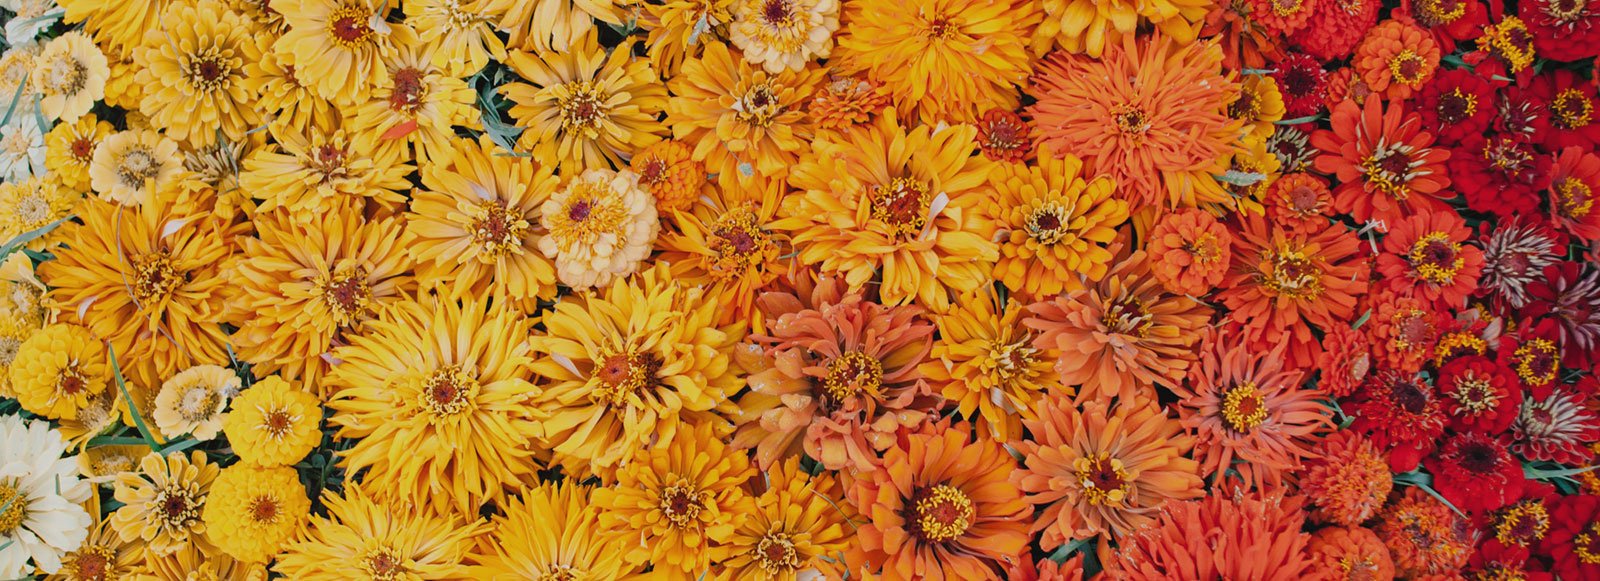 Flower photo of yellow, orange and red hues